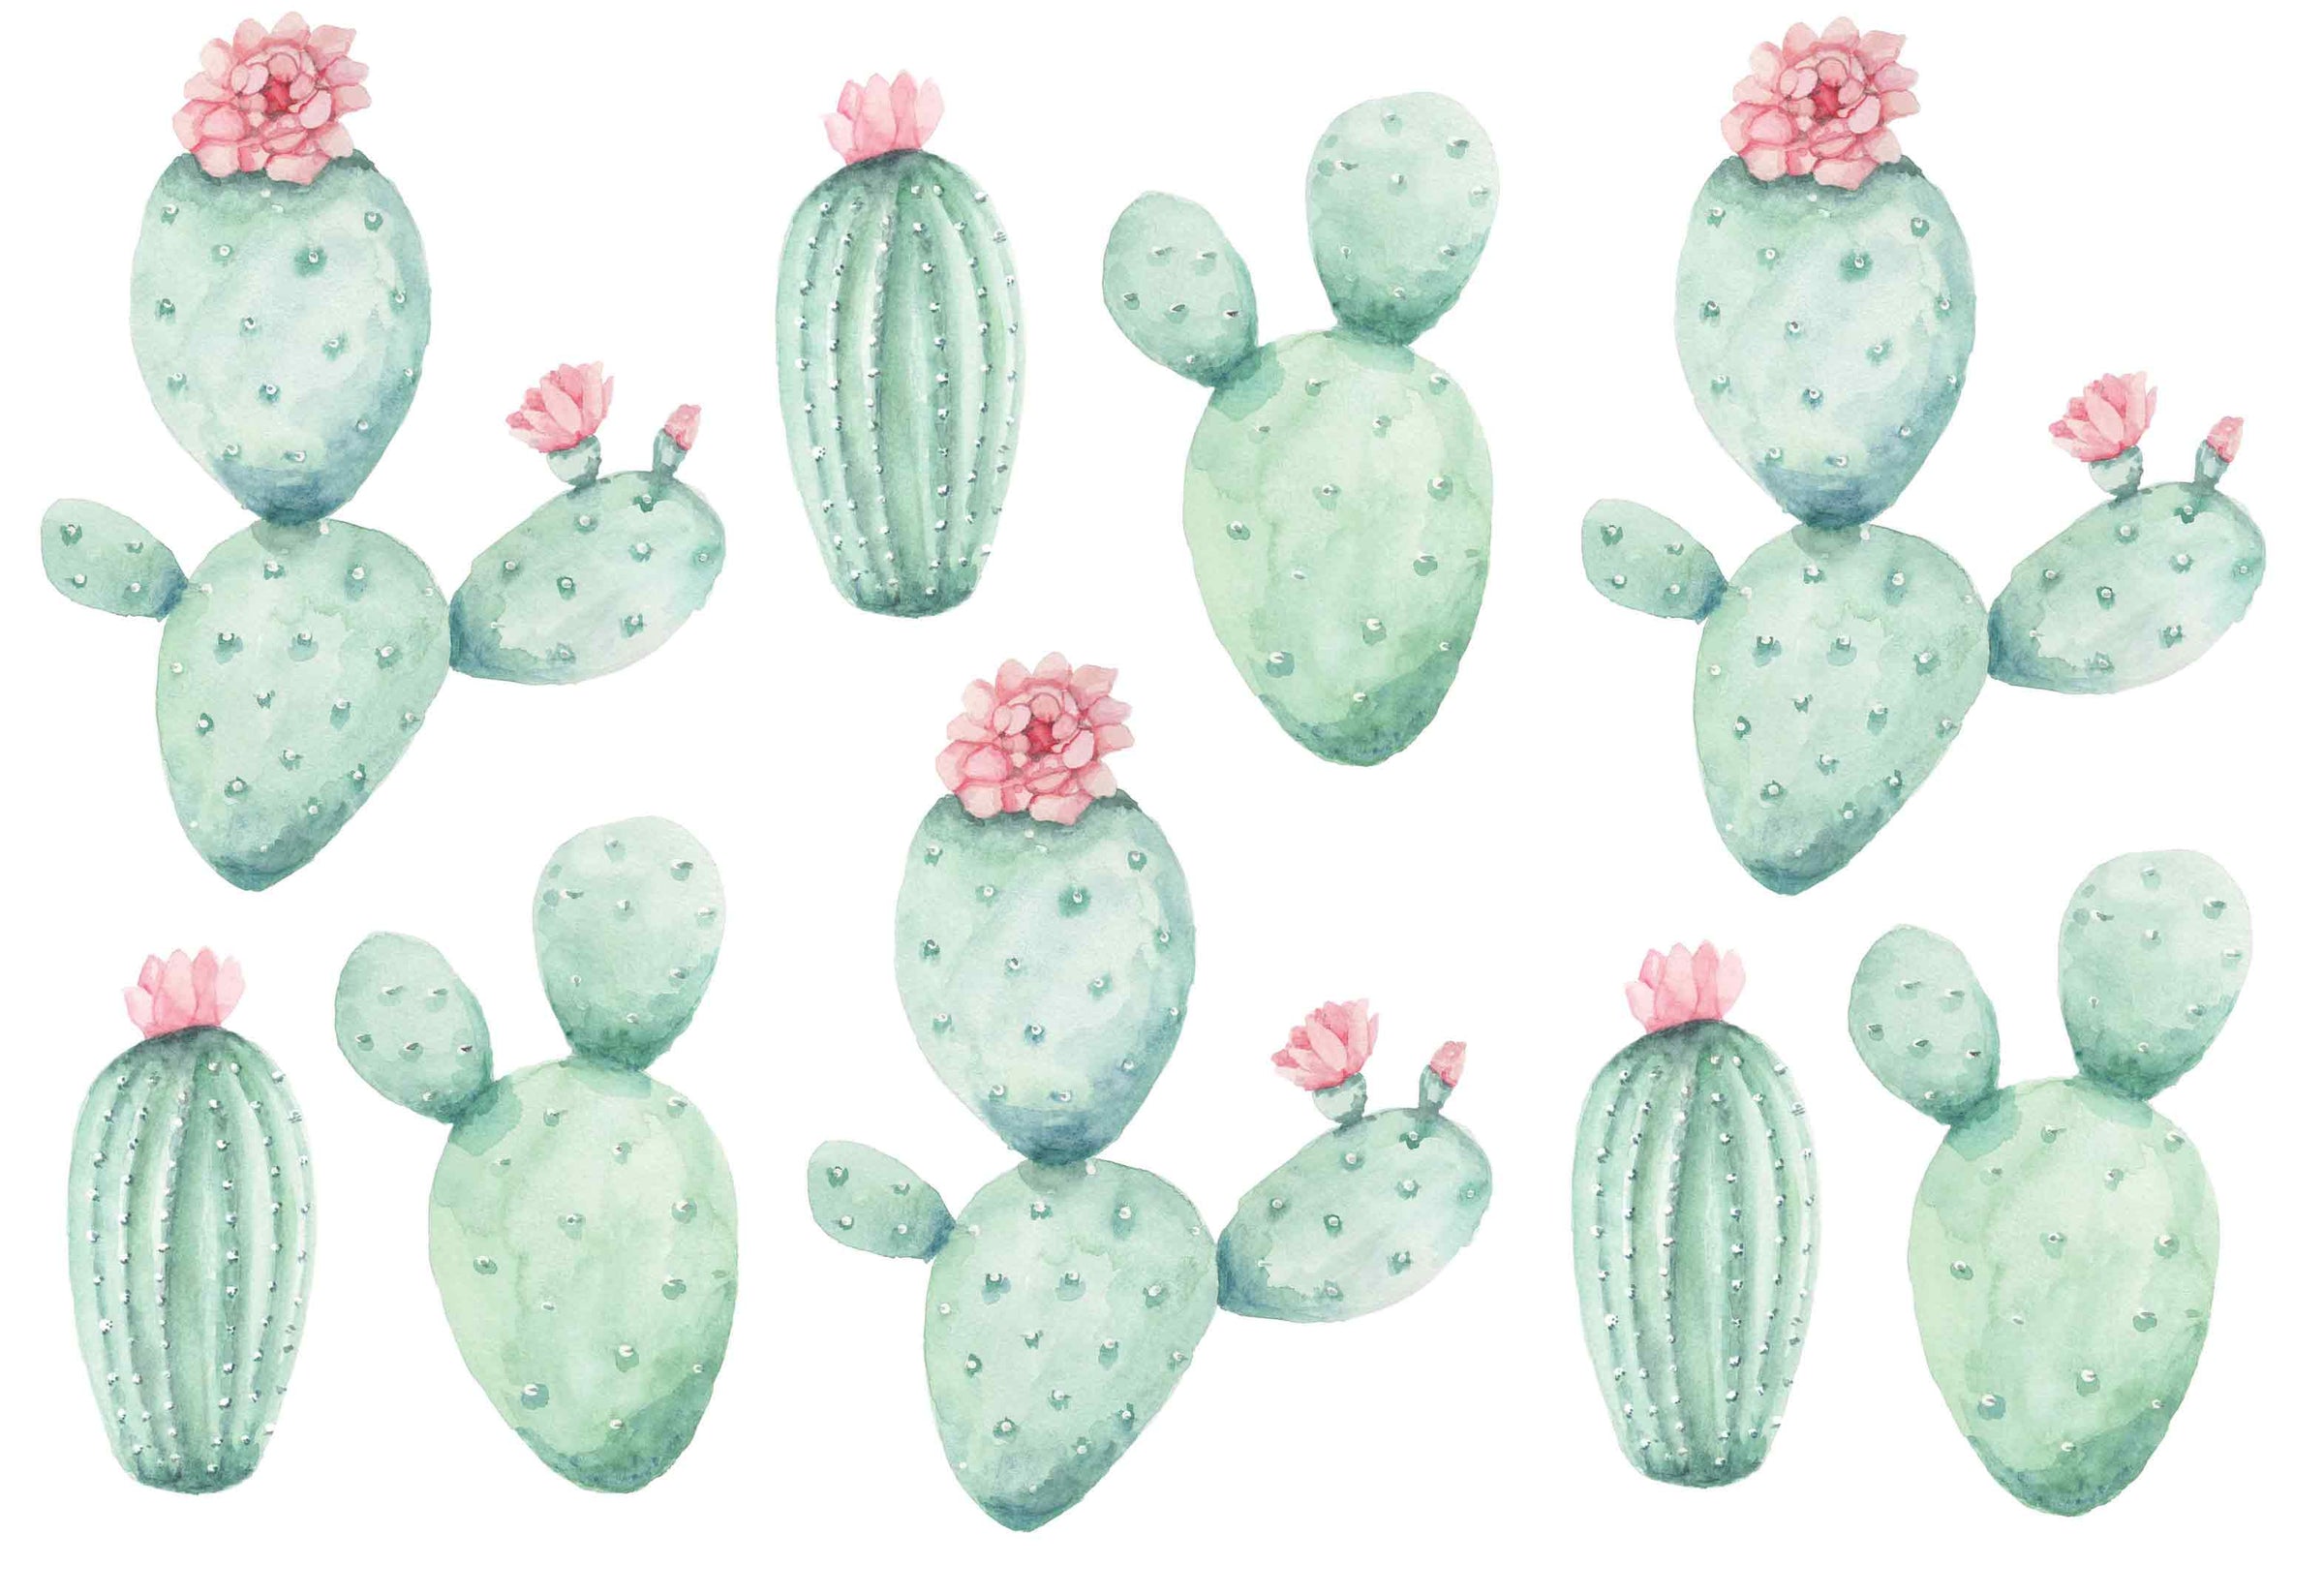 Flowering Cactus Wall Stickers